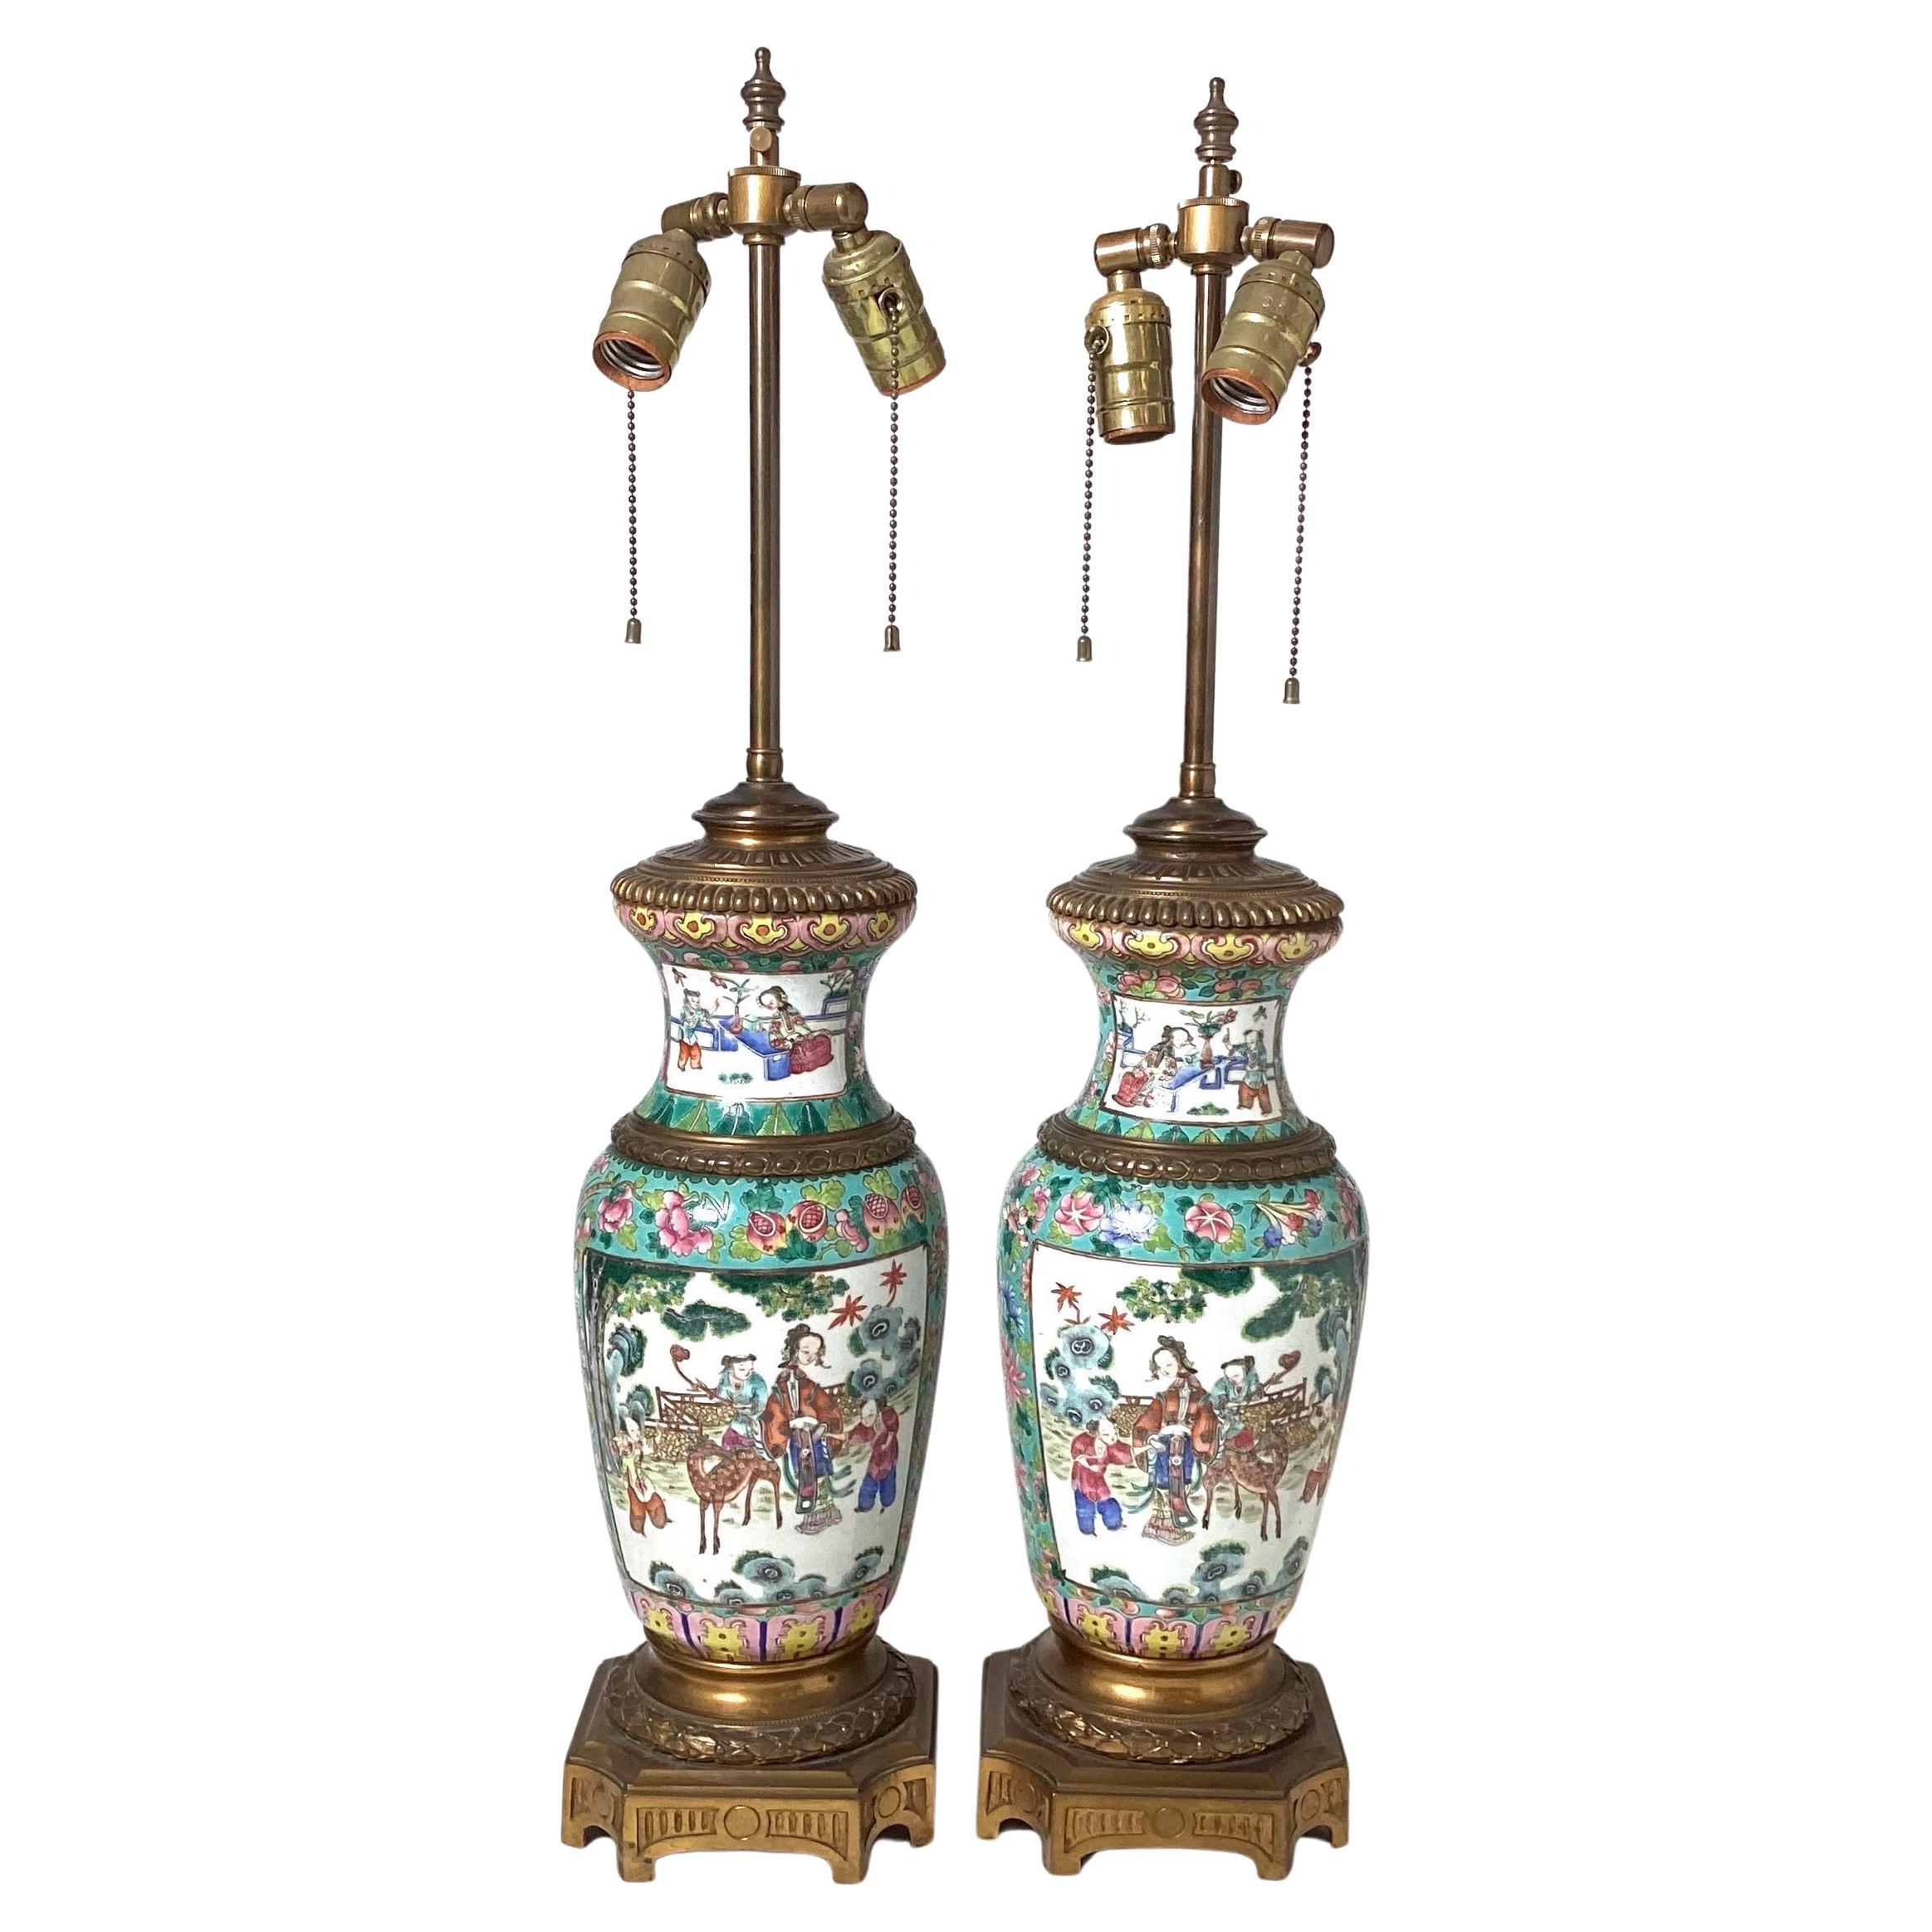 Stunning Pair of Early 19th Century Chinese Export Bronze Mounted Lamps